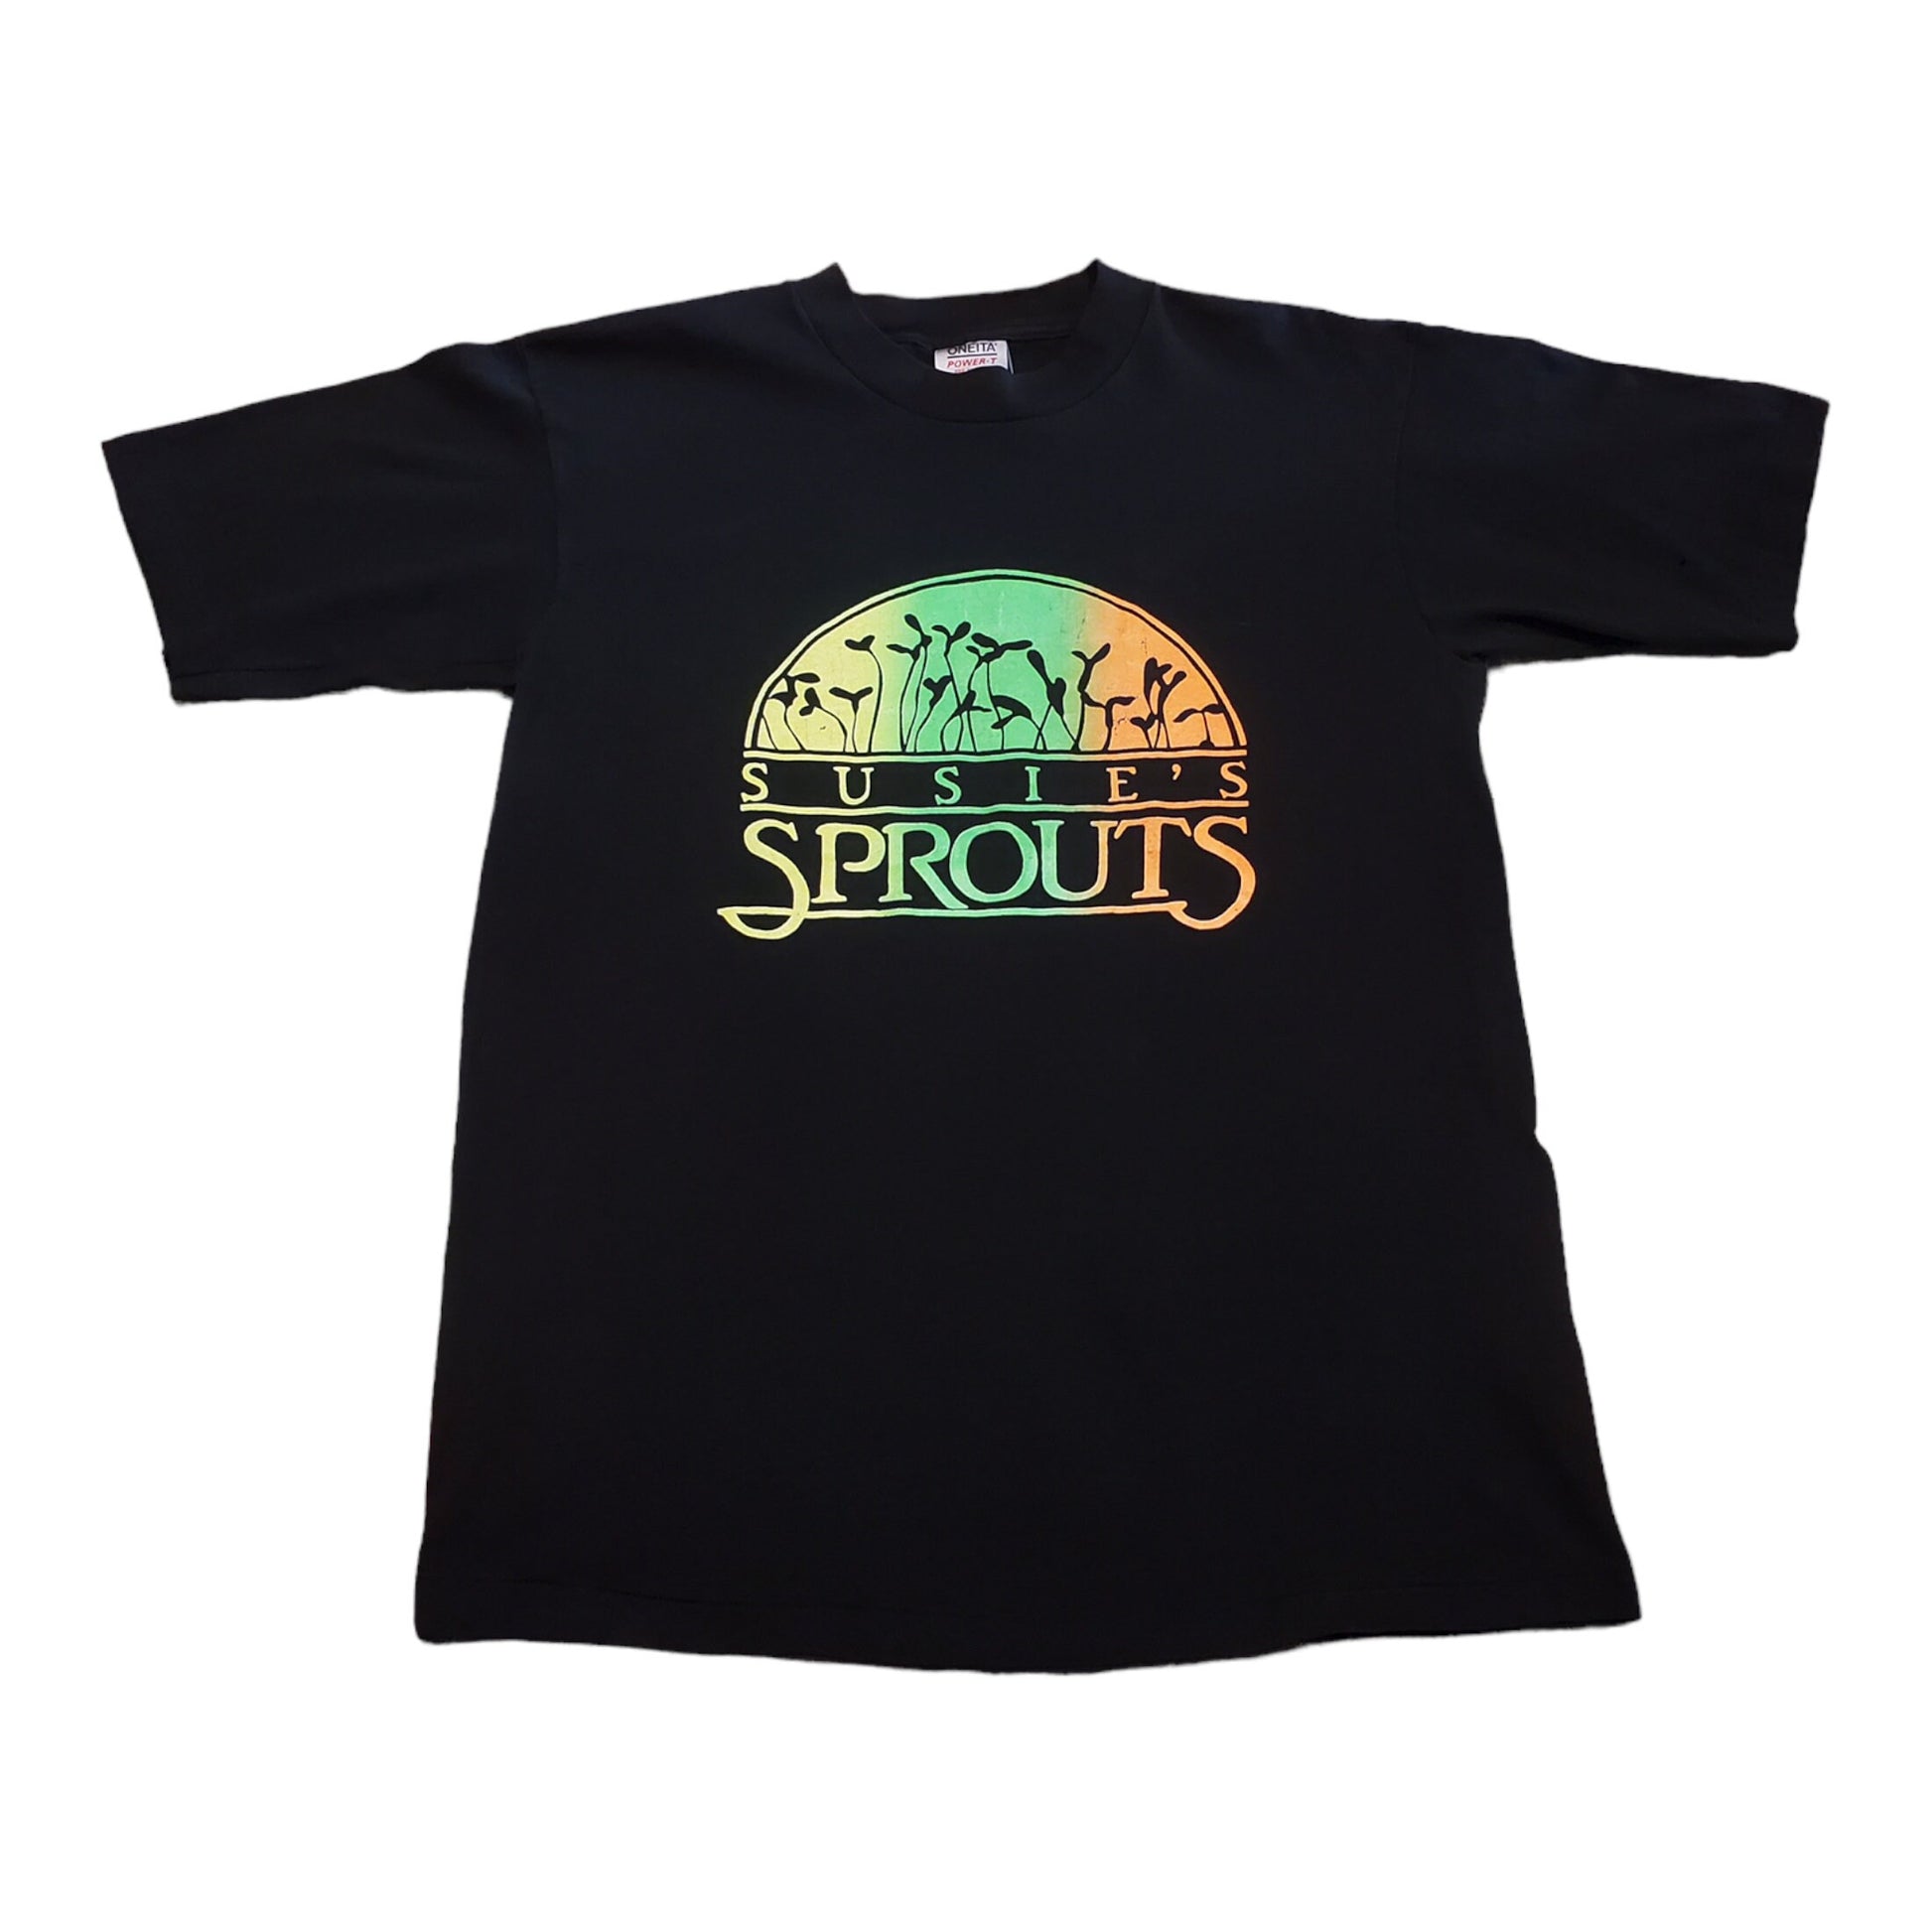 1990s Susie's Sprouts T-Shirt Made in USA Size M